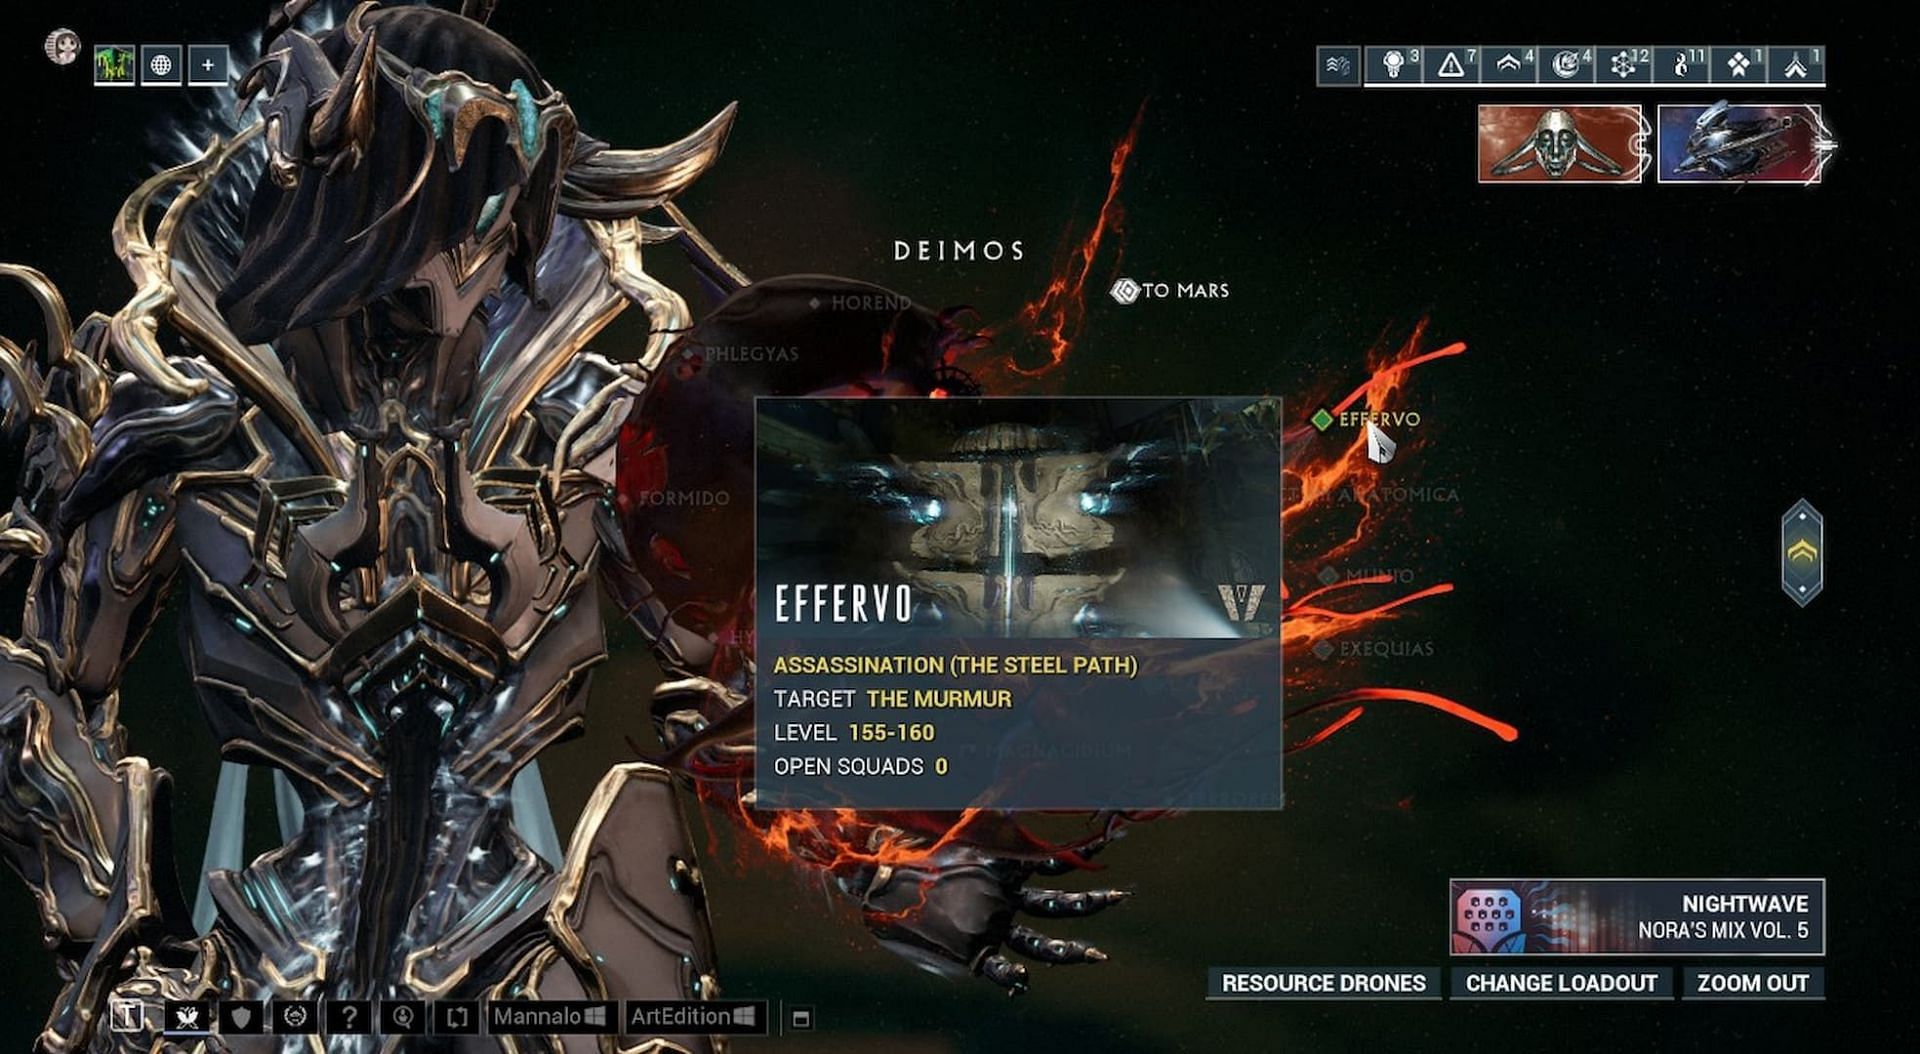 The Fragmented boss can be found on Effervo (Deimos) in Warframe (Image via Digital Extremes)